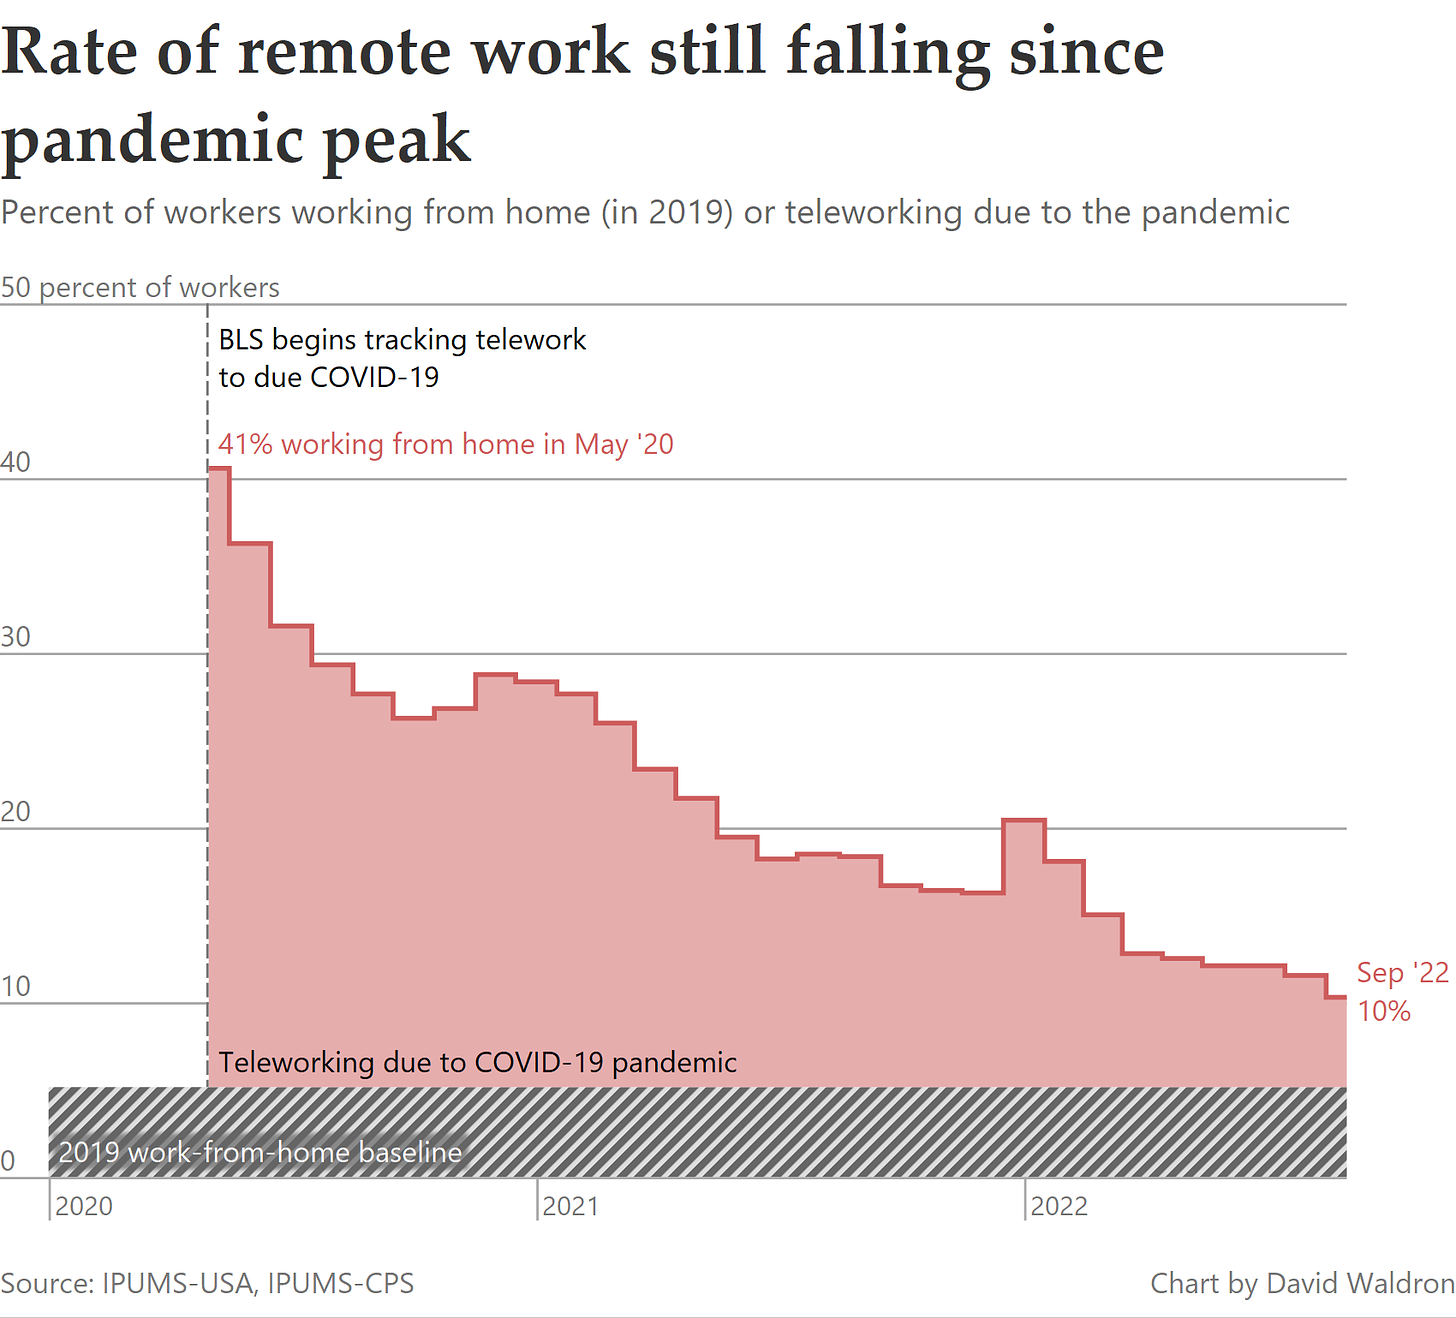 Chart showing work-from-home rates over time. Rate began at 41% in May 2020, when the data was first collected, and declined to about 10% in September 2022. About 5% are assumed to be working from home originally, based on 2019 estimates.